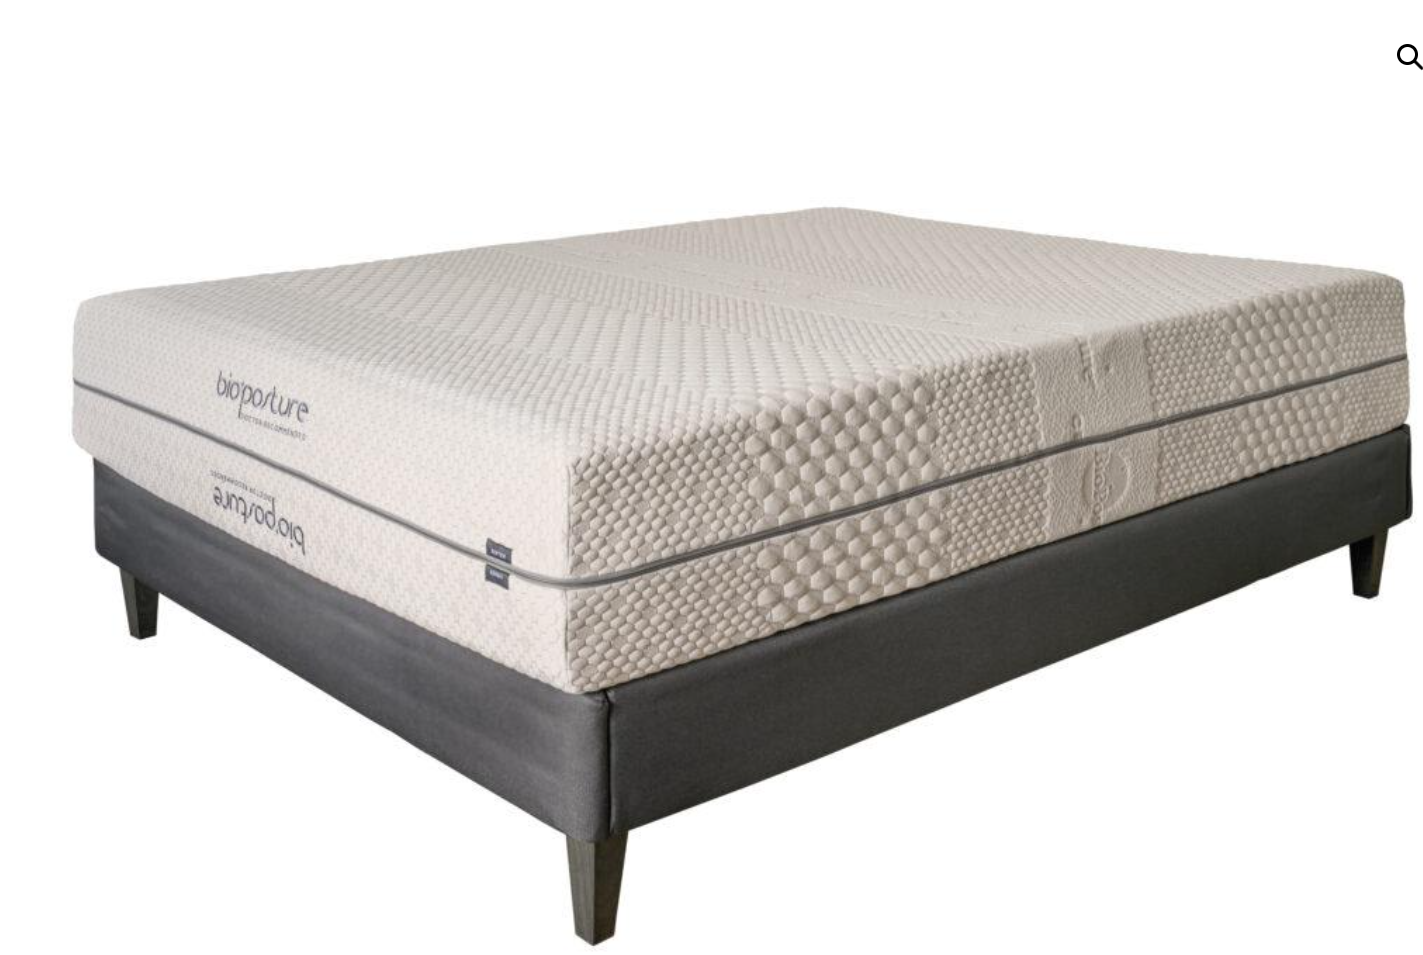 BioPosture 12" iSwitch Flippable Two Sided Mattress - Medium Firm/Medium Soft